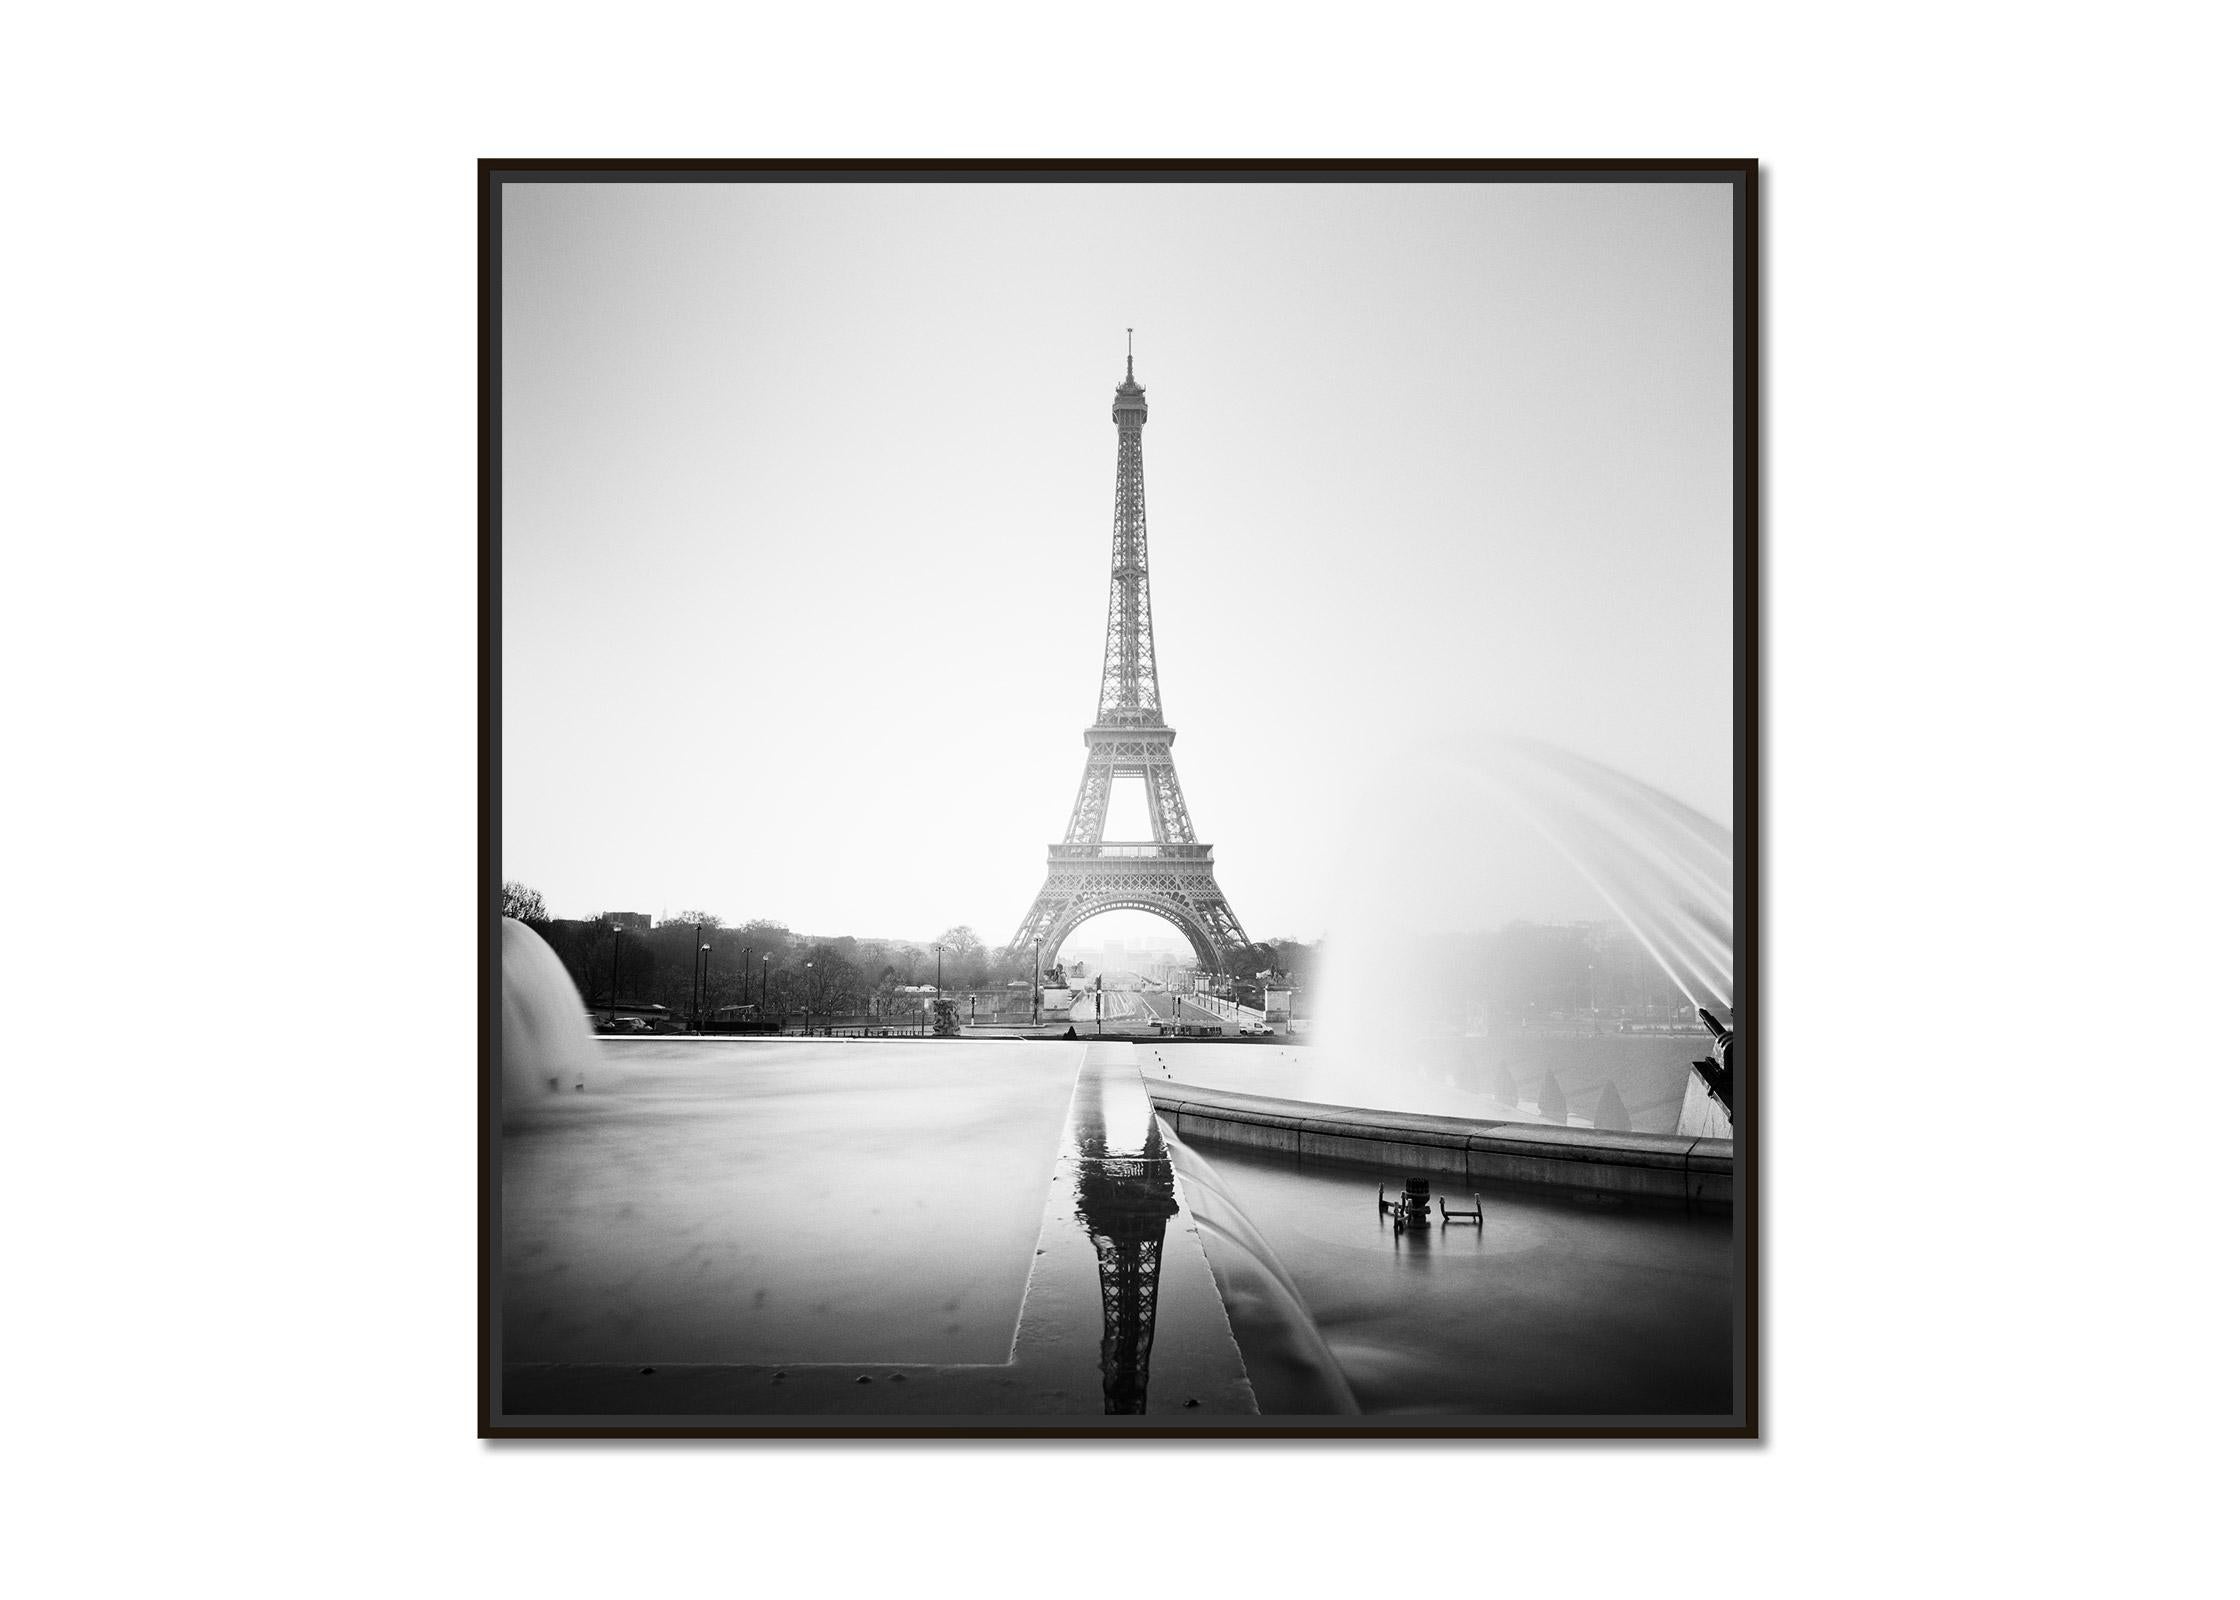 Eiffel Tower fontaine du trocadero Paris, black and white cityscape photography - Photograph by Gerald Berghammer, Ina Forstinger